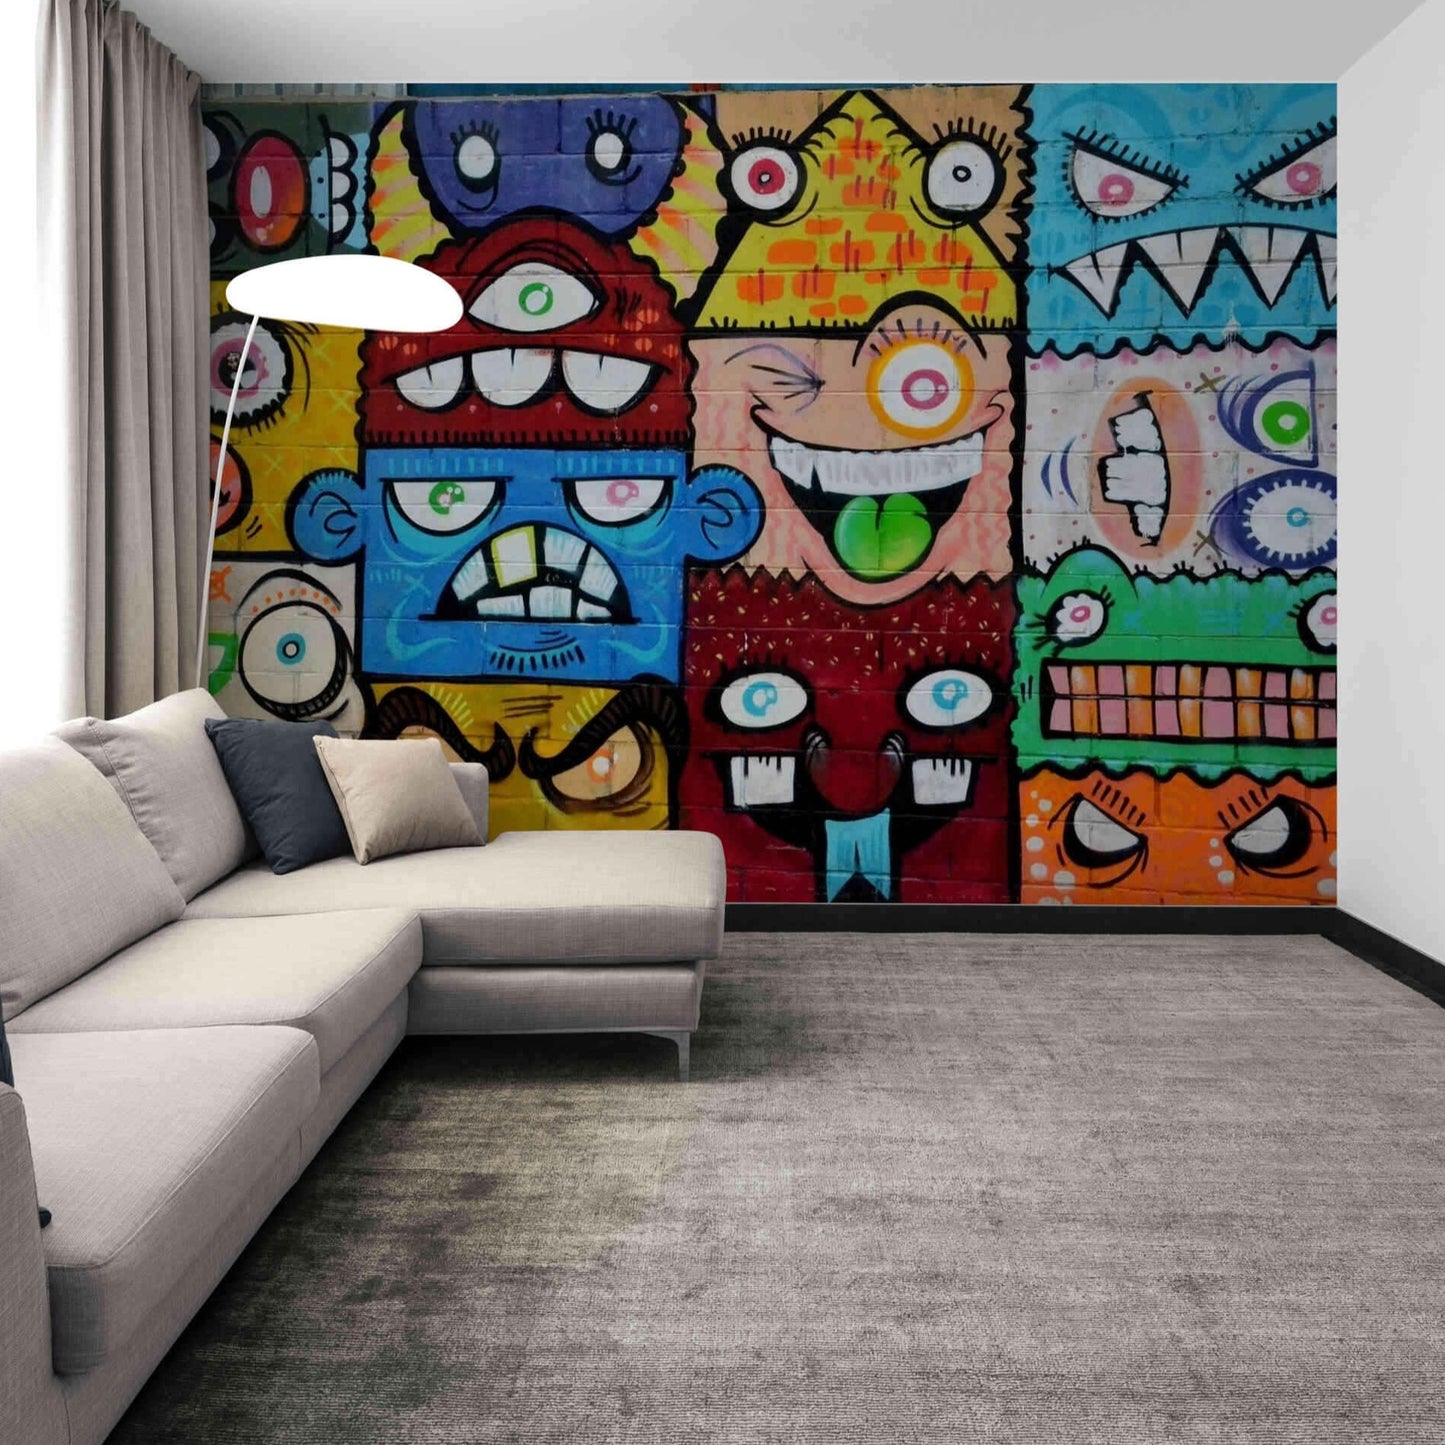 Vibrant pop art and graffiti fusion on a wall mural, featuring bold colors and iconic imagery, perfect for adding a dynamic and artistic statement to any room.